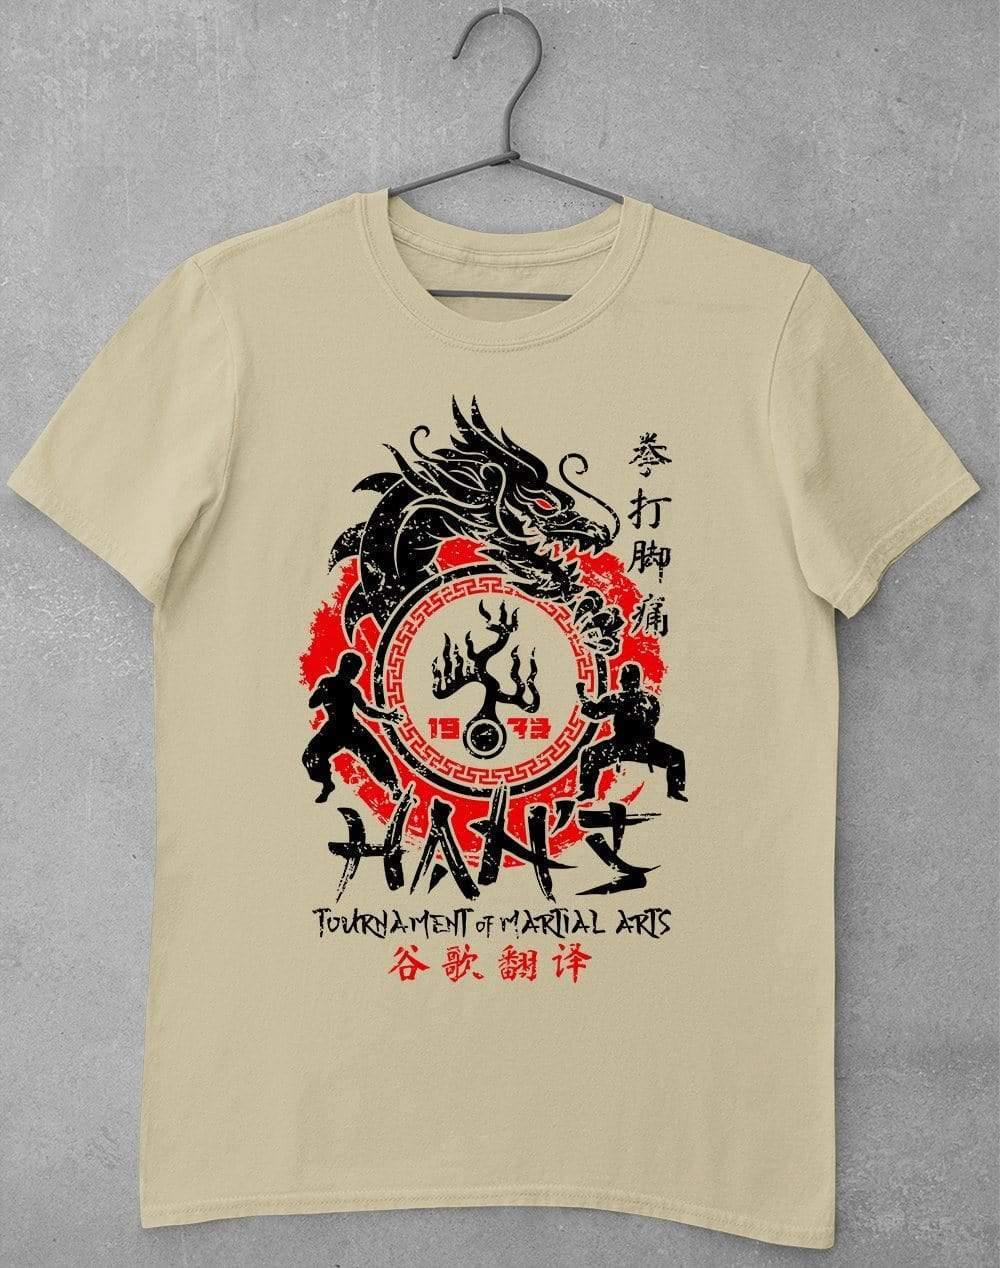 Han's Tournament of Martial Arts T-Shirt S / Sand  - Off World Tees